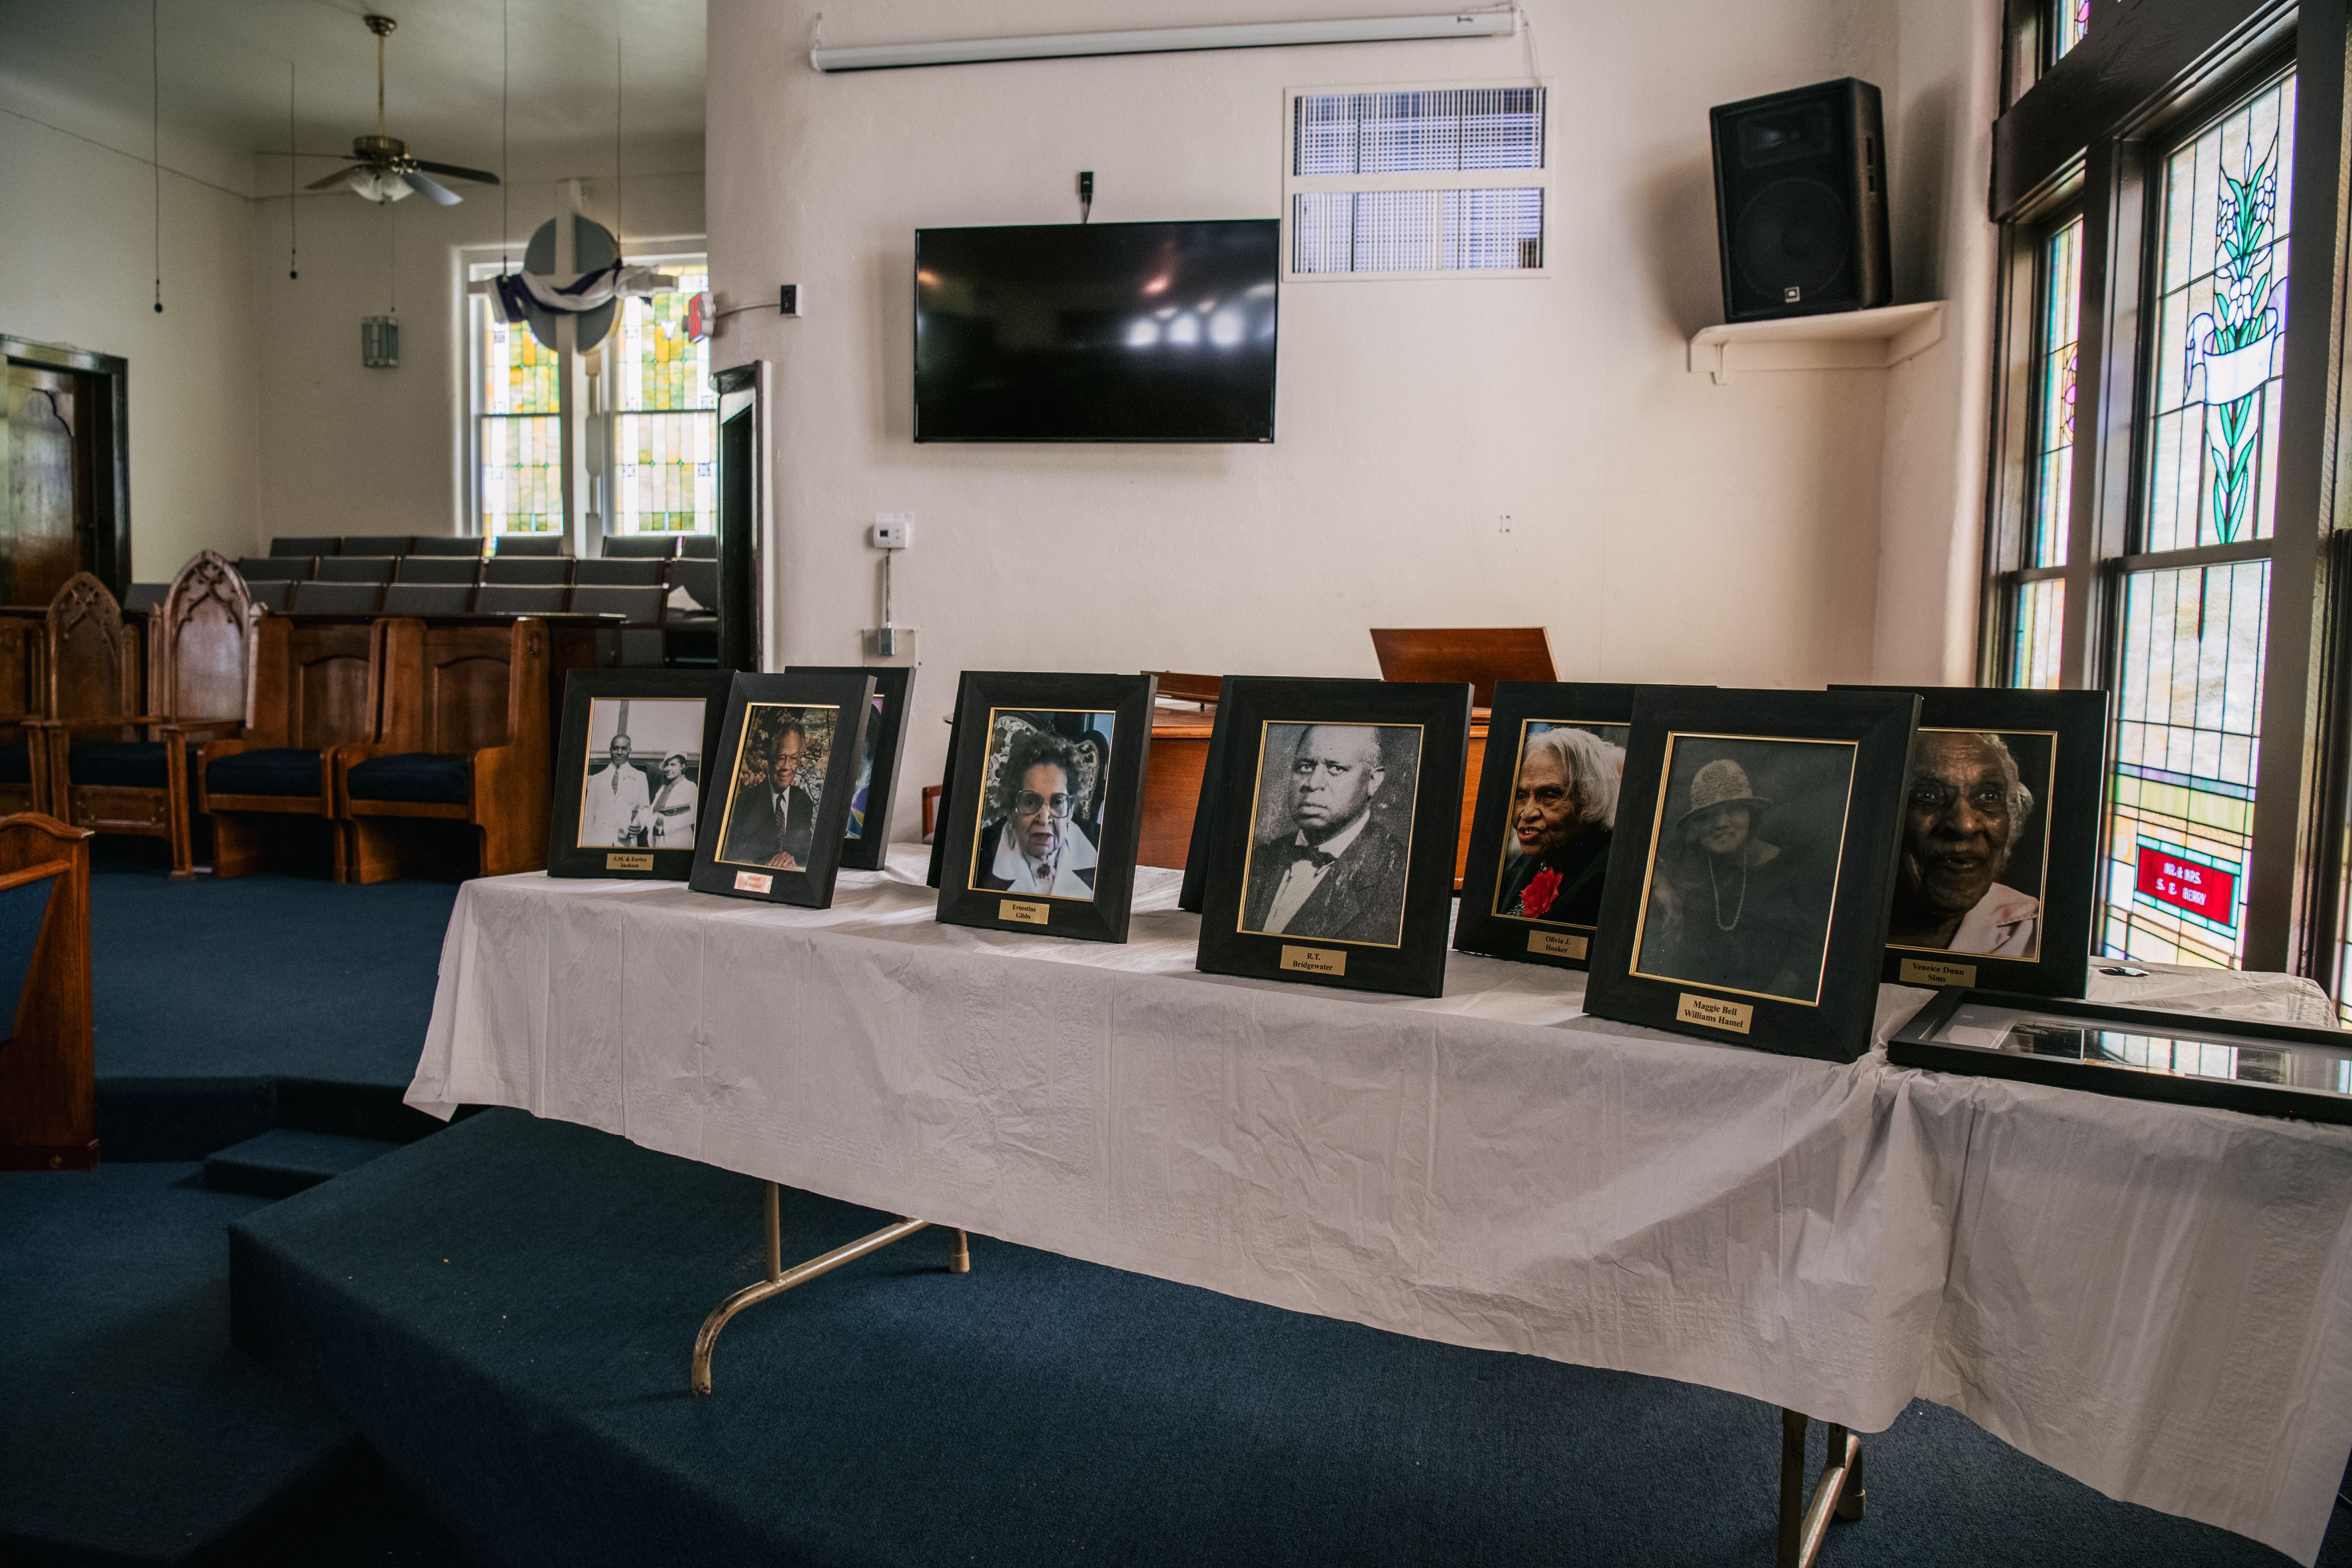 Pictures of parishioners from the AME Church congregation are displayed during commemorations of the 100th anniversary of the Tulsa Race Massacre on May 30, 2021 in Tulsa, Oklahoma. 